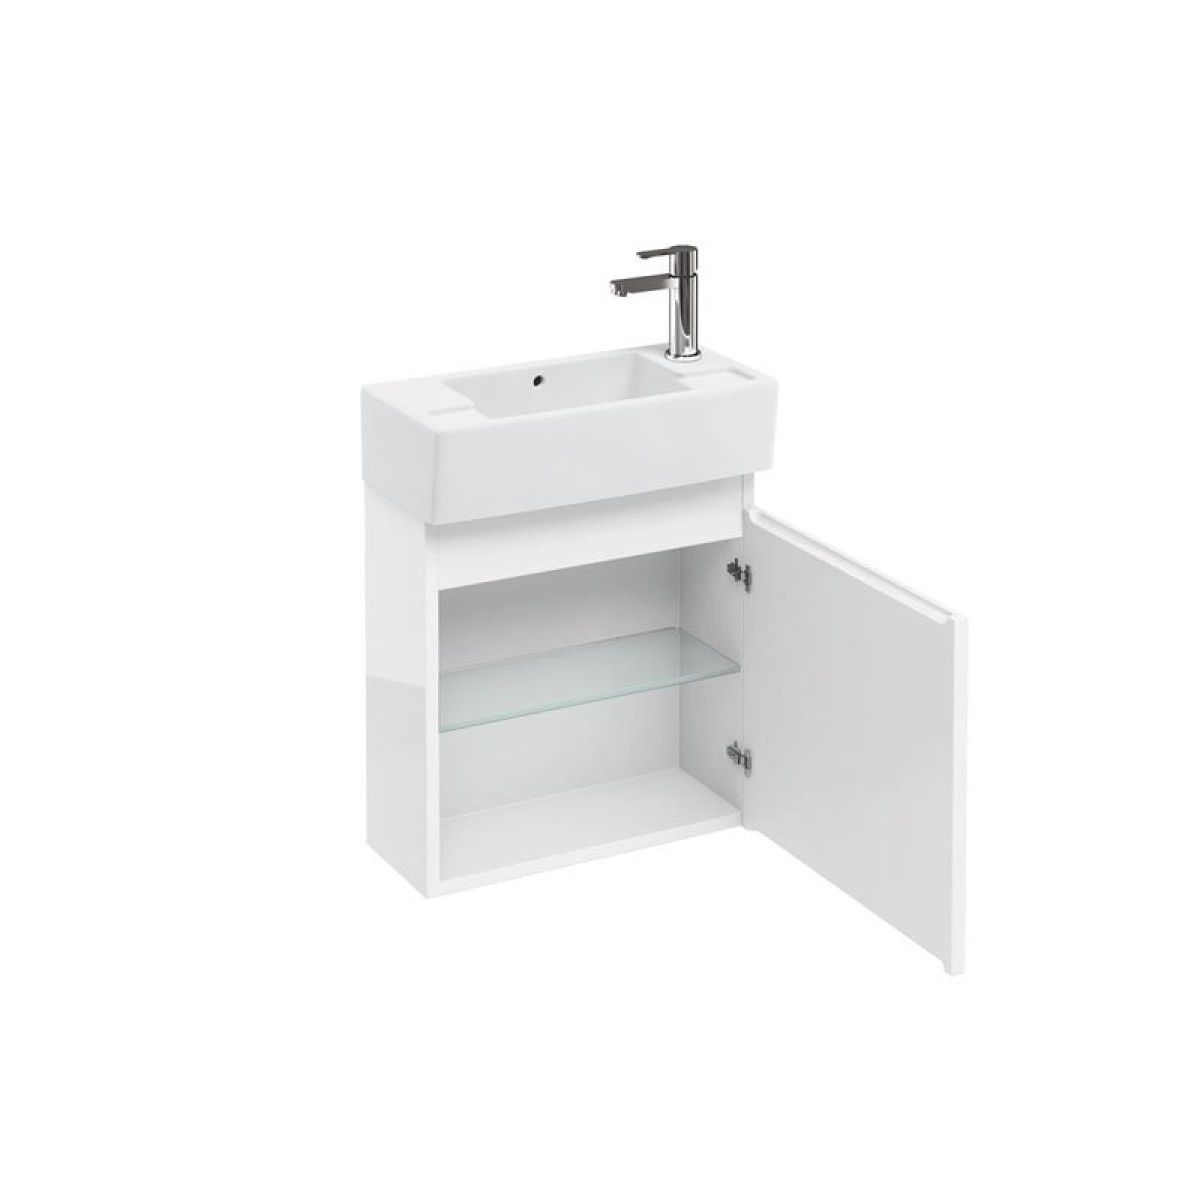 Britton Compact Wall Hung Lh White, Wall Hung Vanity Unit For Cloakroom